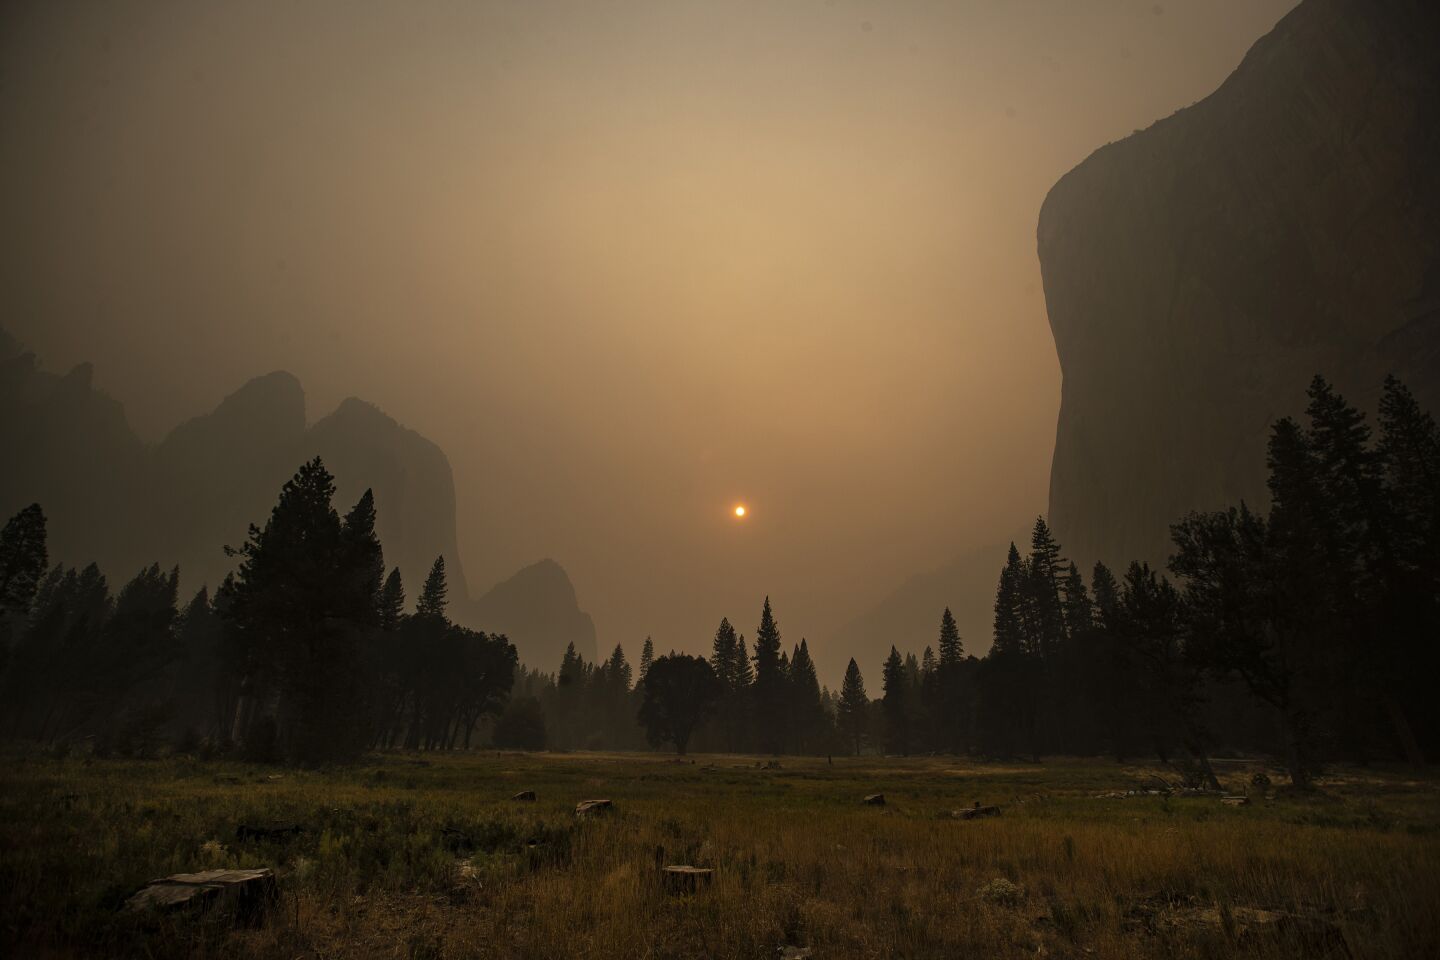 The sun is dim and shrouded in thick smoke in the Yosemite Valley.